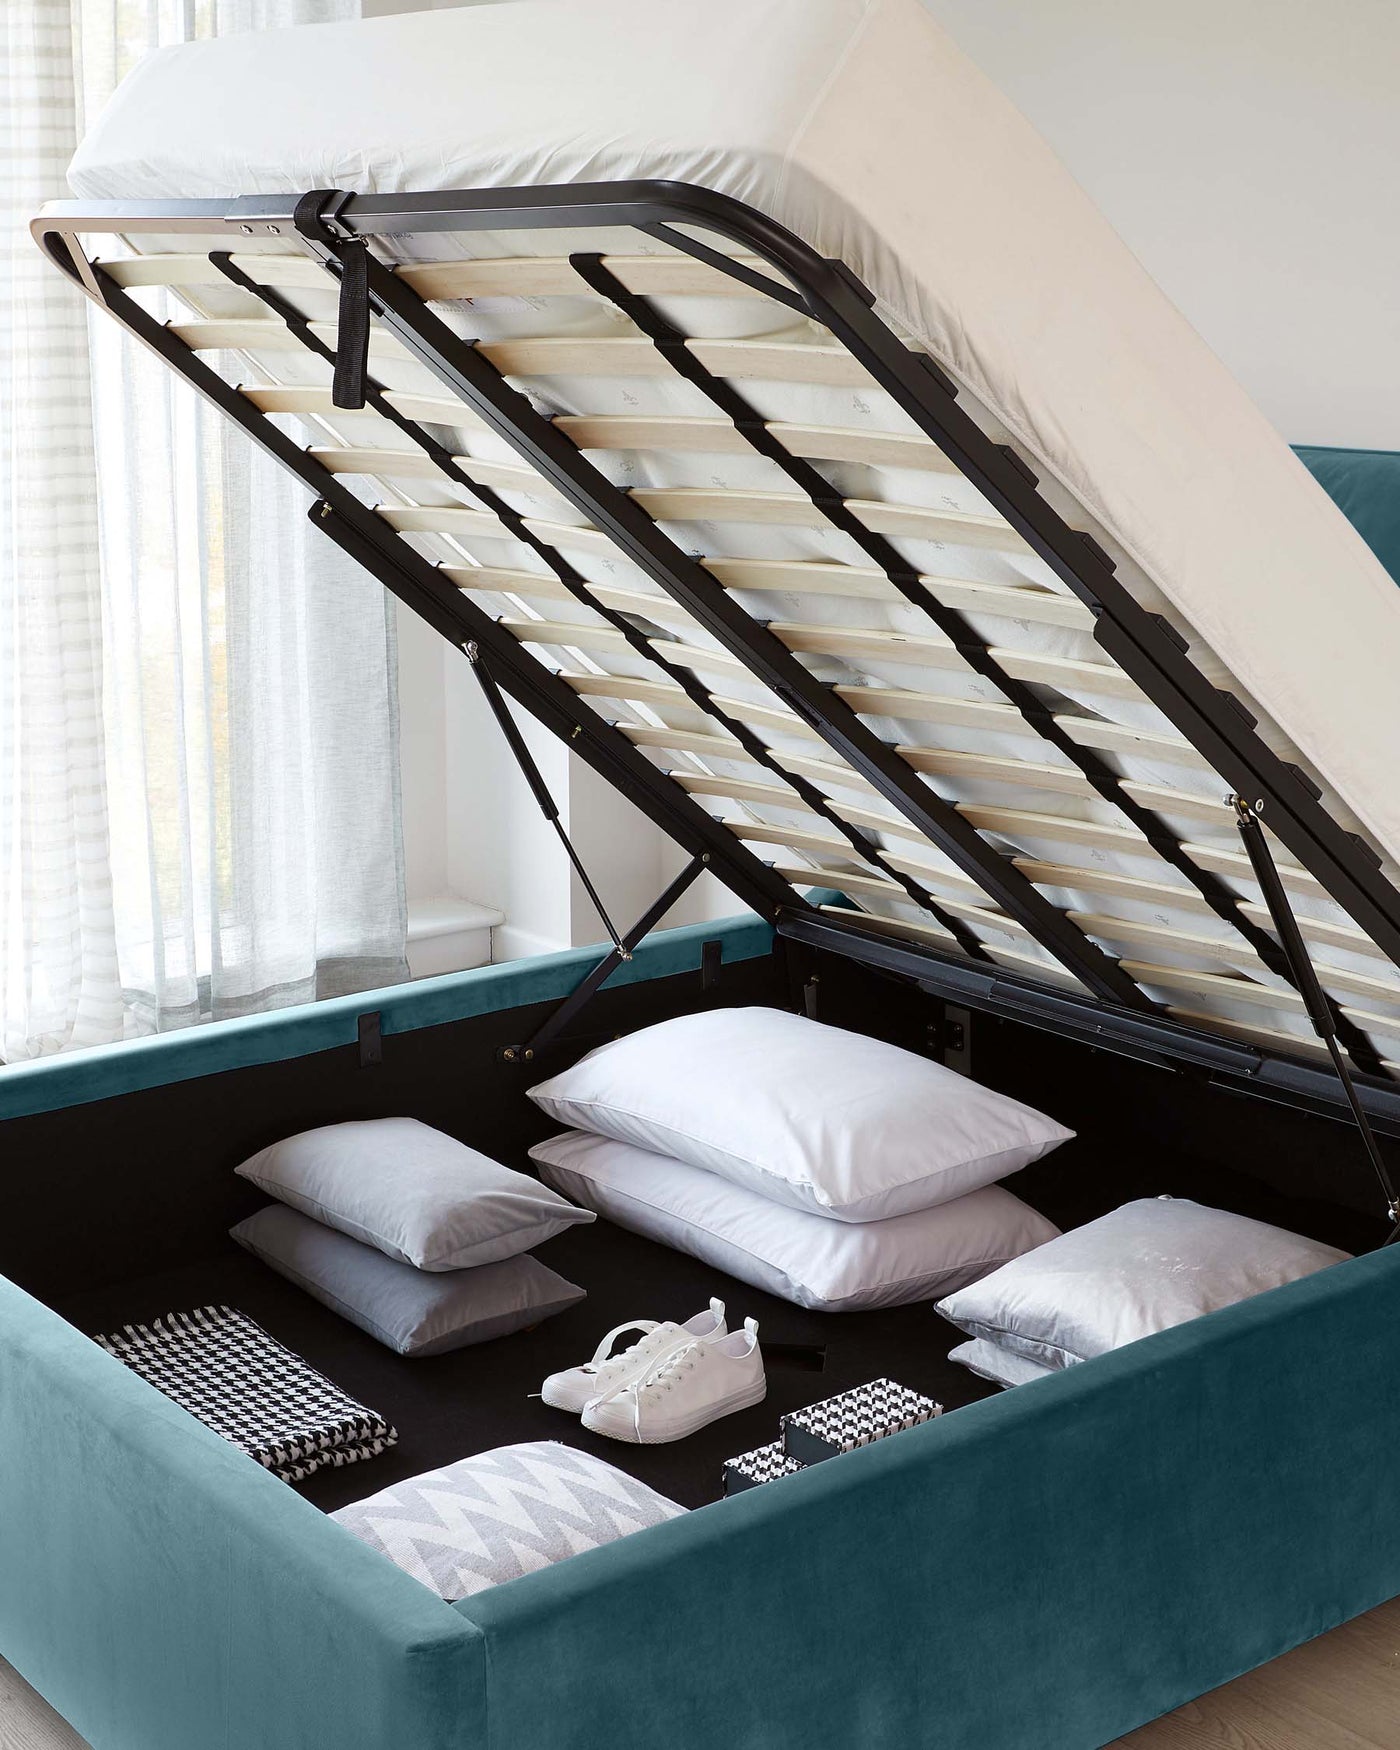 Teal upholstered storage bed with gas lift mechanism revealing spacious under-mattress storage containing pillows and personal items, set against a bright interior with sheer curtains.